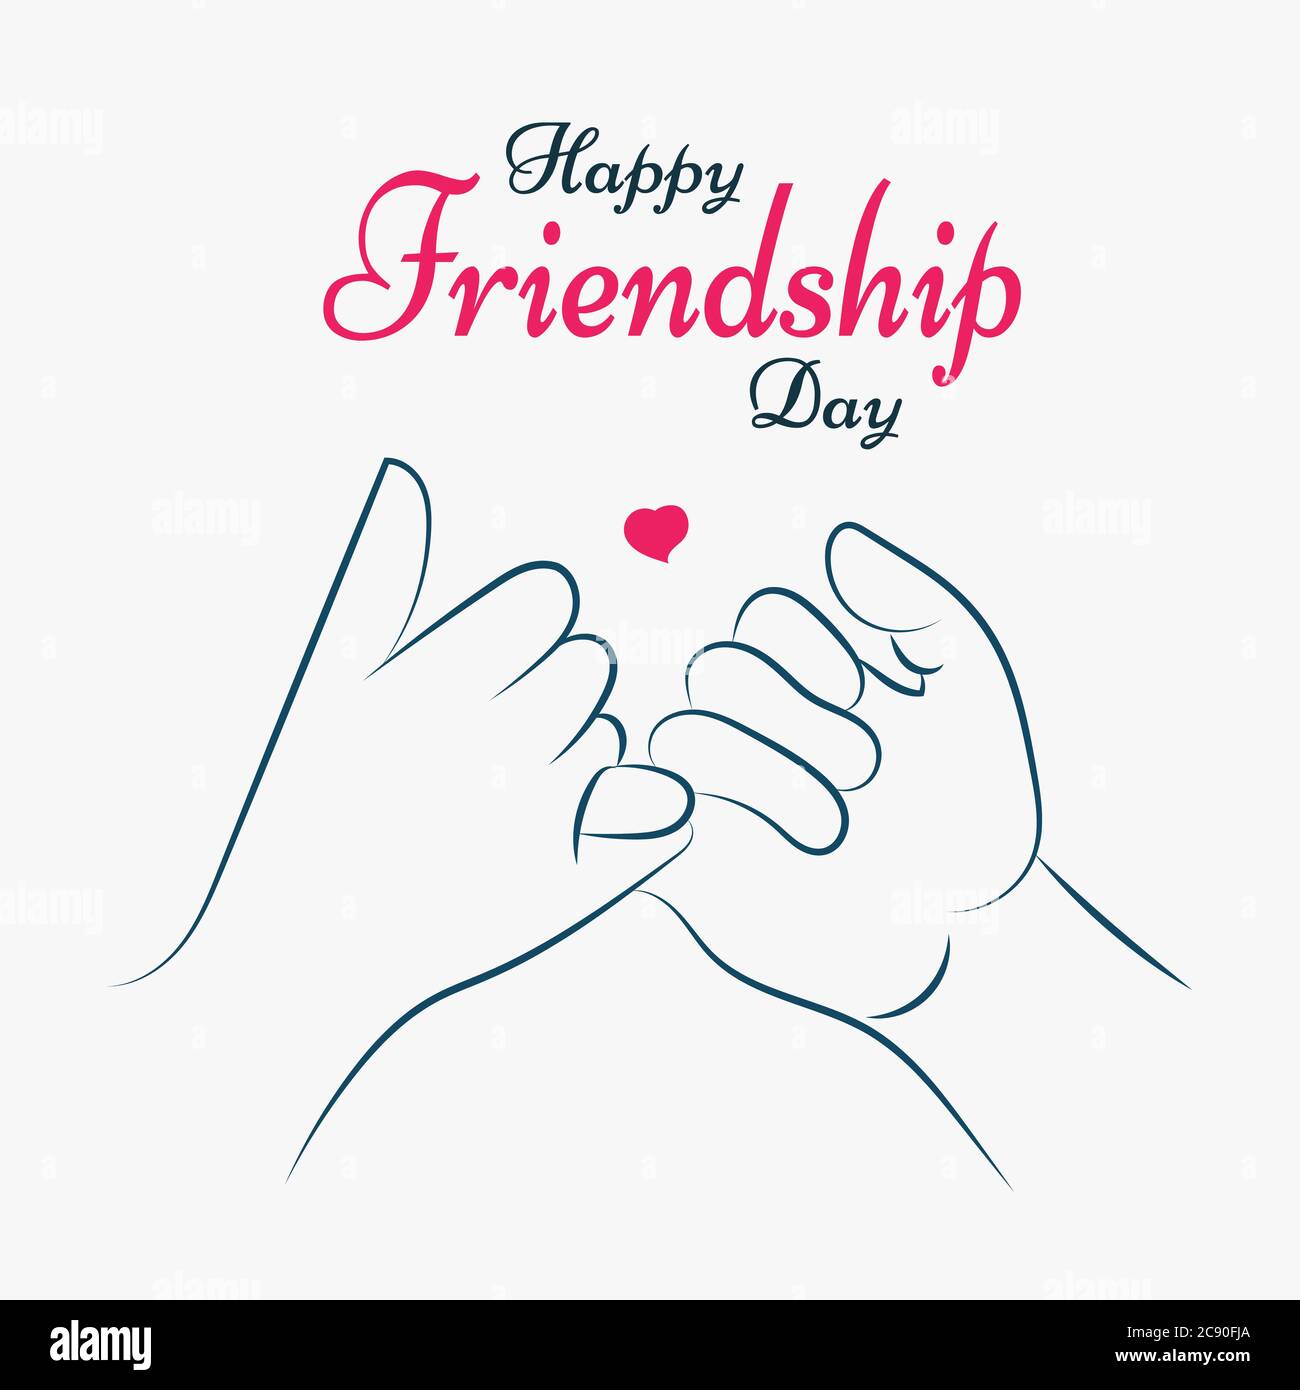 Happy Friendship Day, friends pinky promise, love flat illustration poster, vector Stock Vector